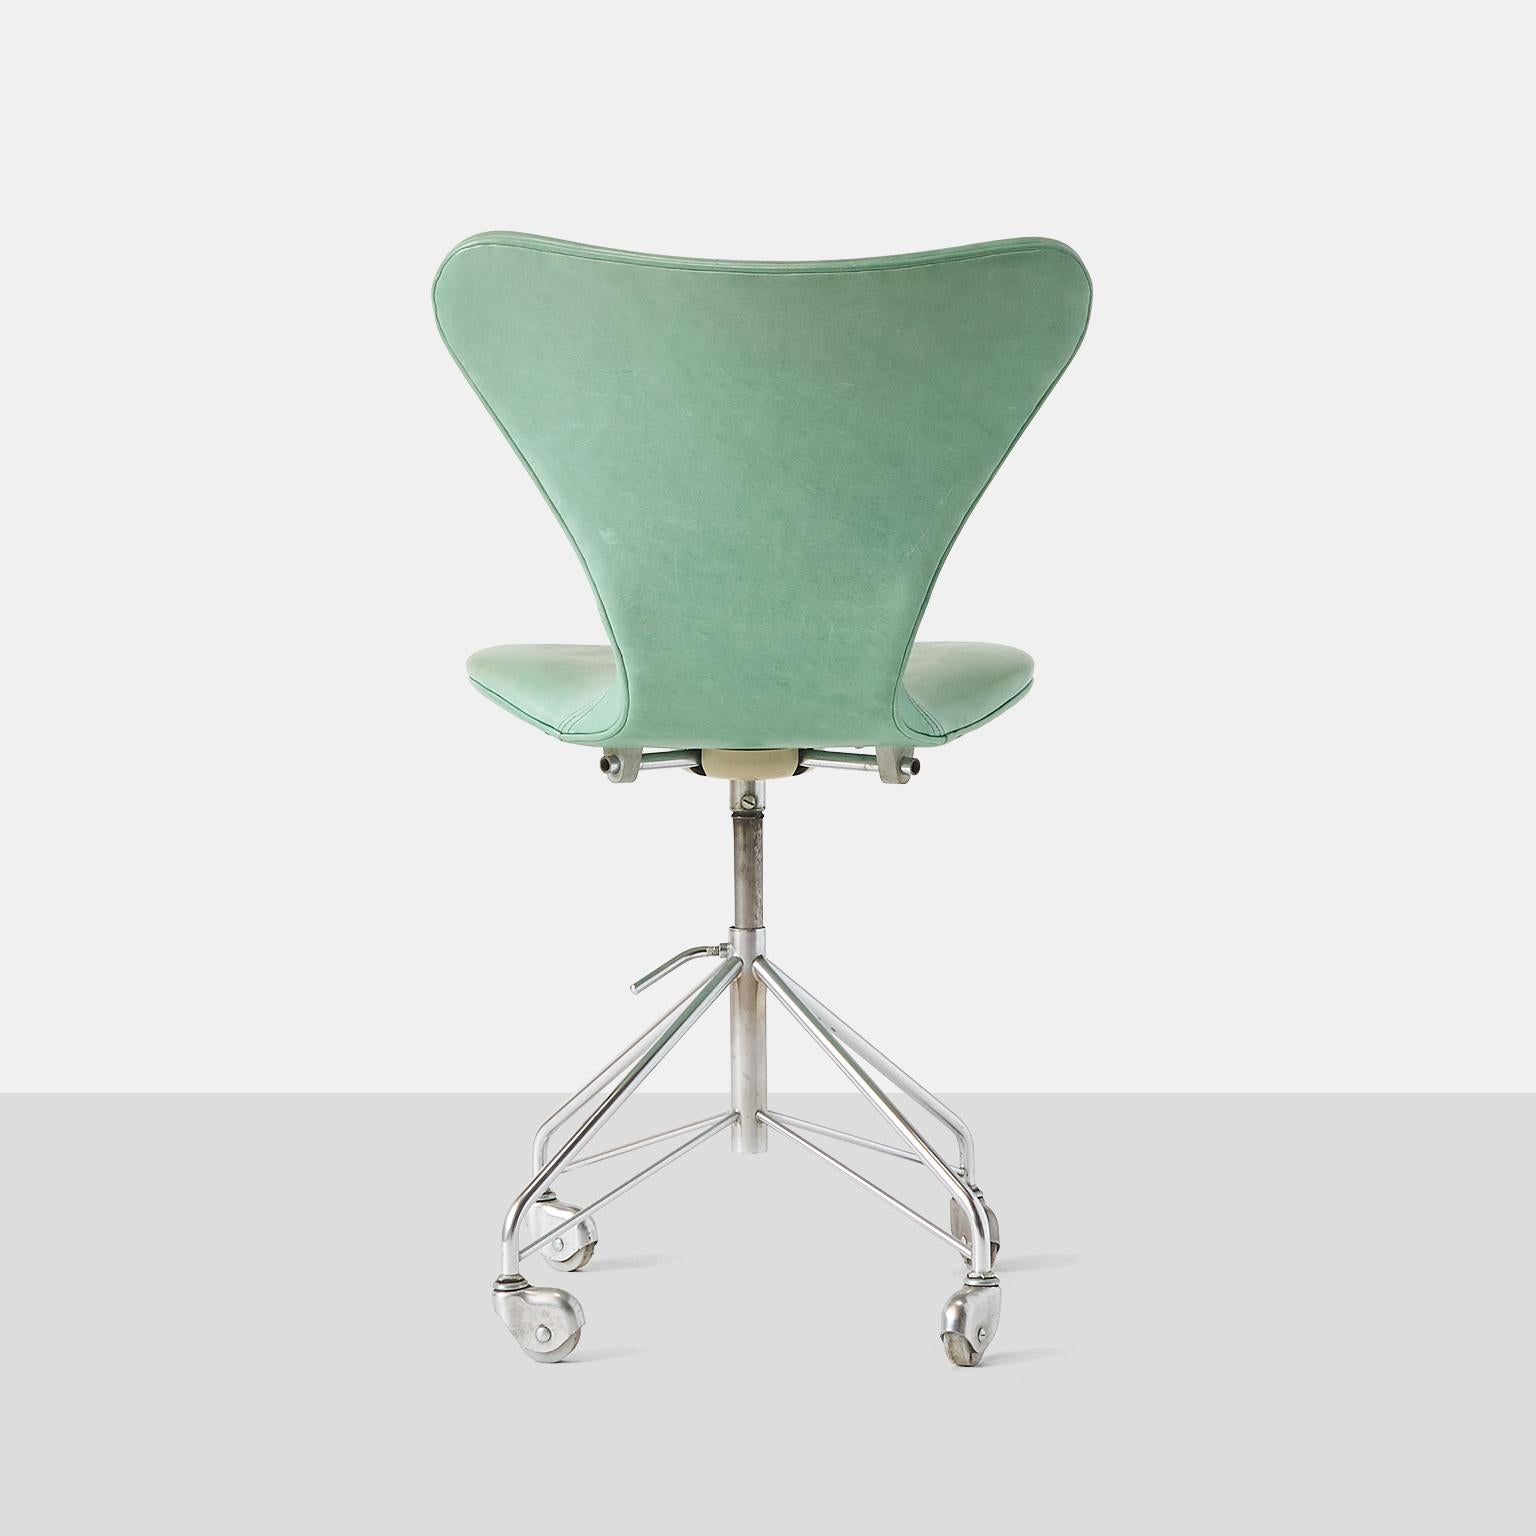 Mid-20th Century A Series 7 Office Chair, Model 3117, by Arne Jacobsen